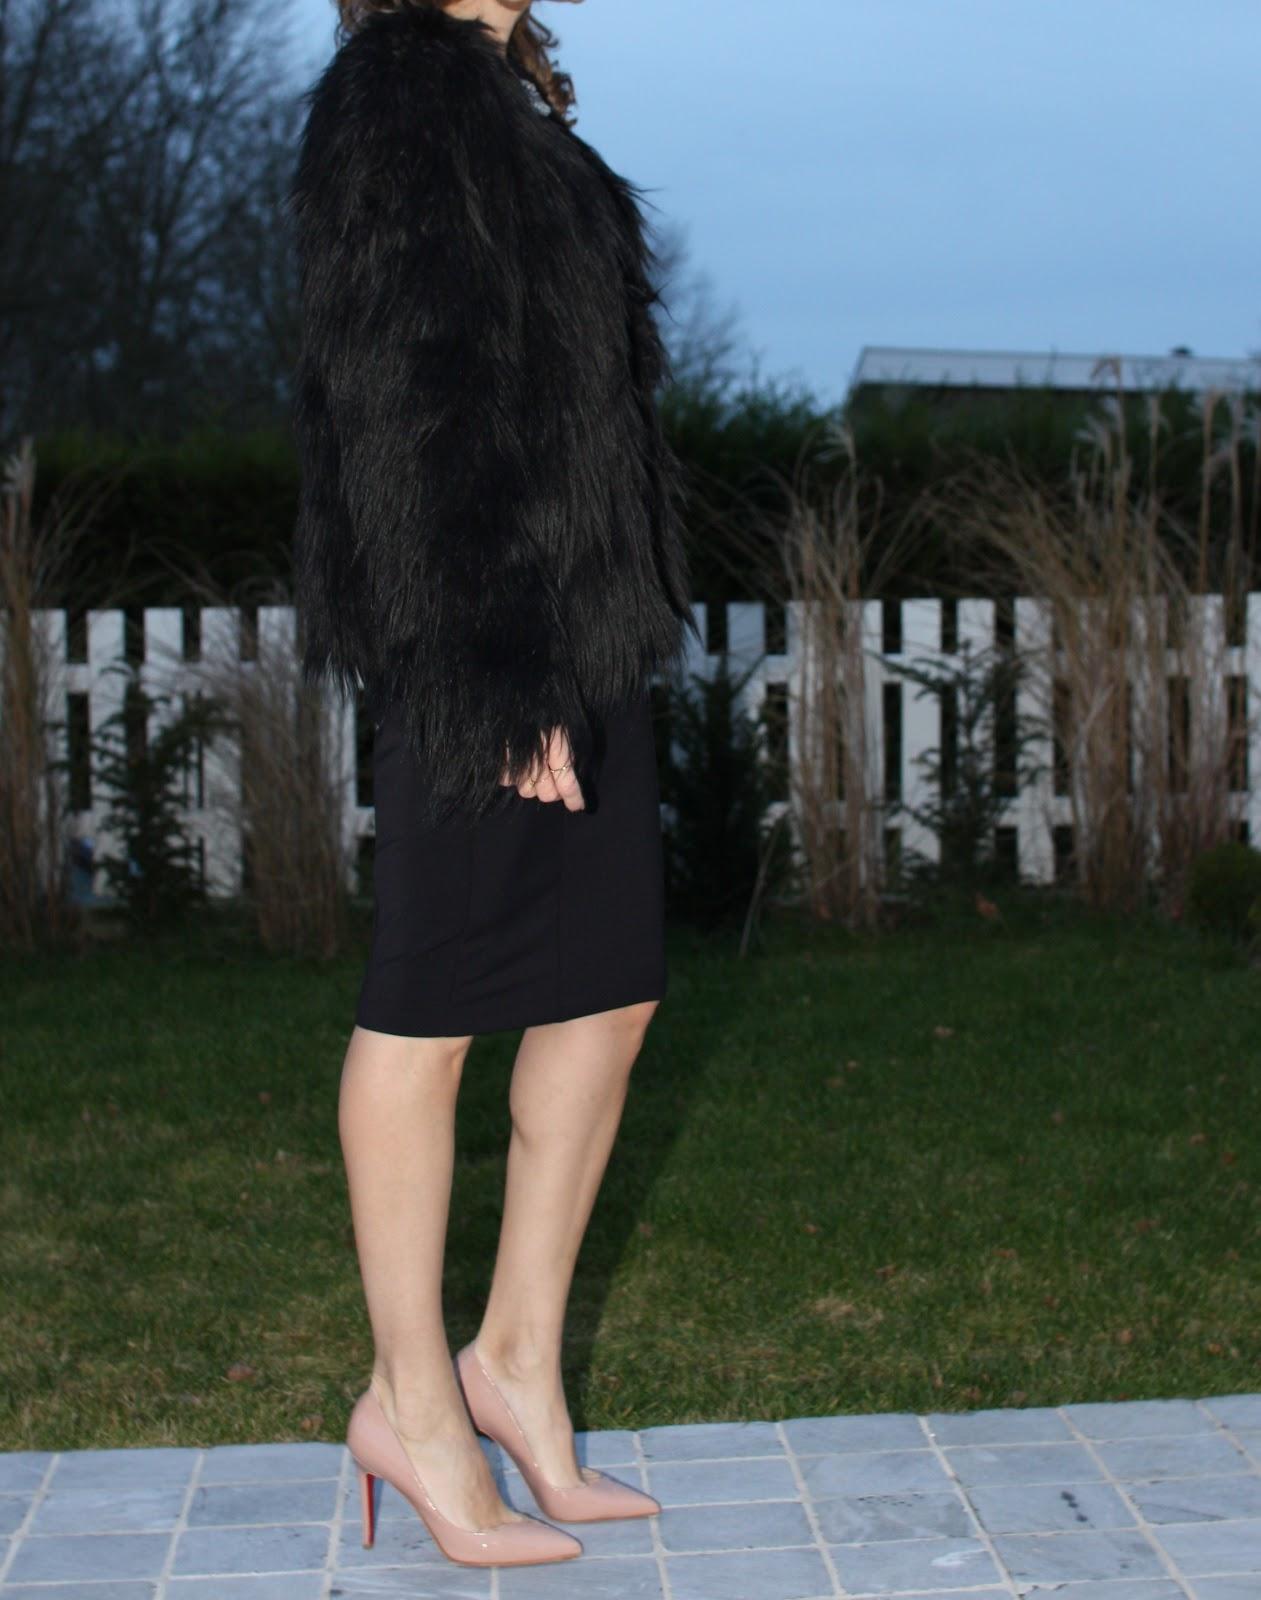 The statement neckline dress, the faux-fur jacket and the nude pumps